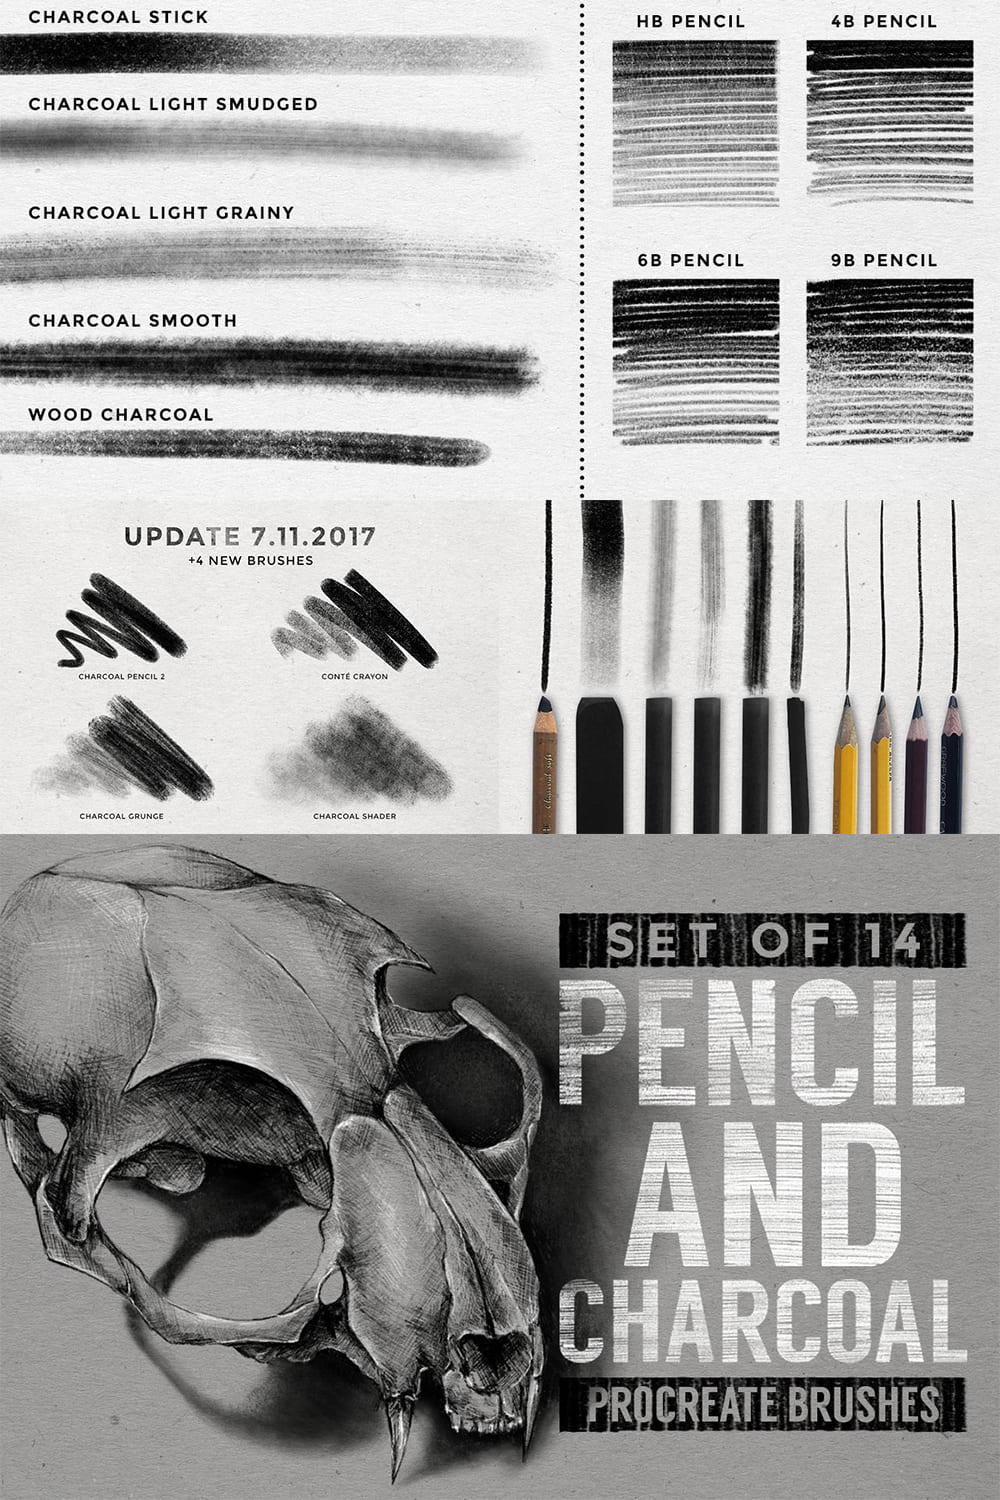 Quality pencils create incredible illustrations with soft shadow transitions.